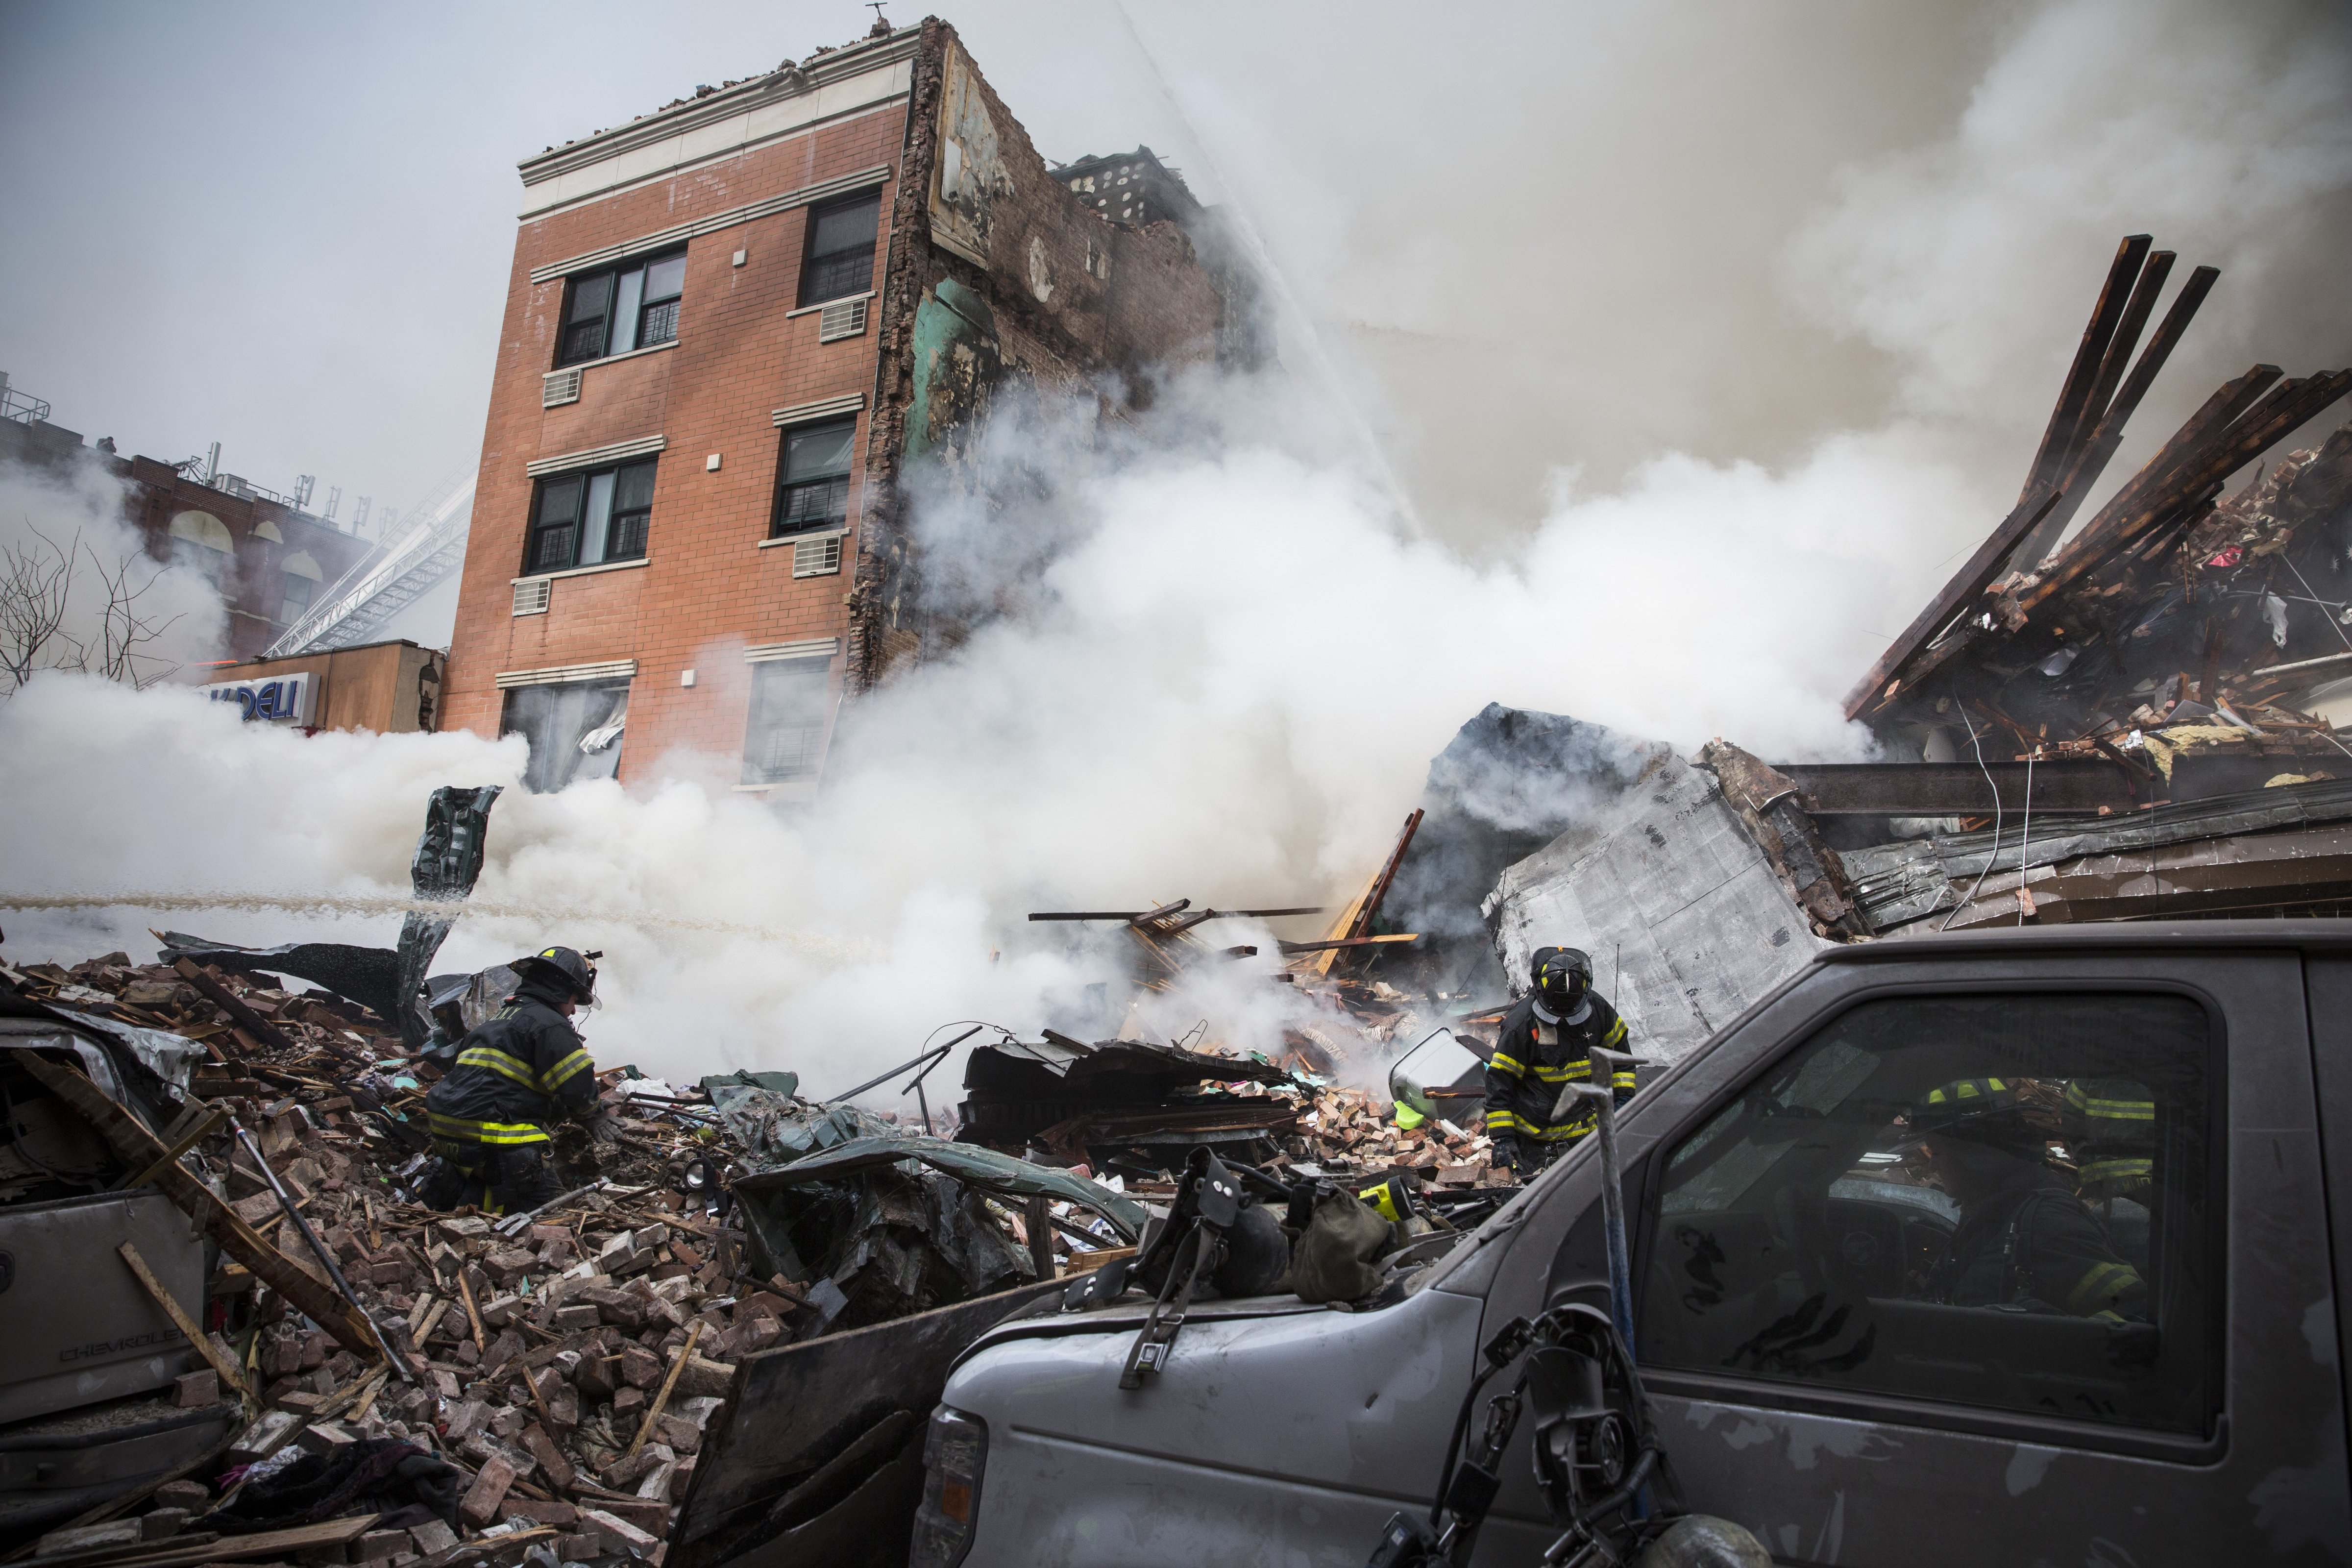 Smoke pours from the debris as the New York City Fire Department responds to a fire and building collapse at 1646 Park Avenue in the Harlem neighborhood of Manhattan on March 12, 2014 (Andrew Burton—Getty Images)